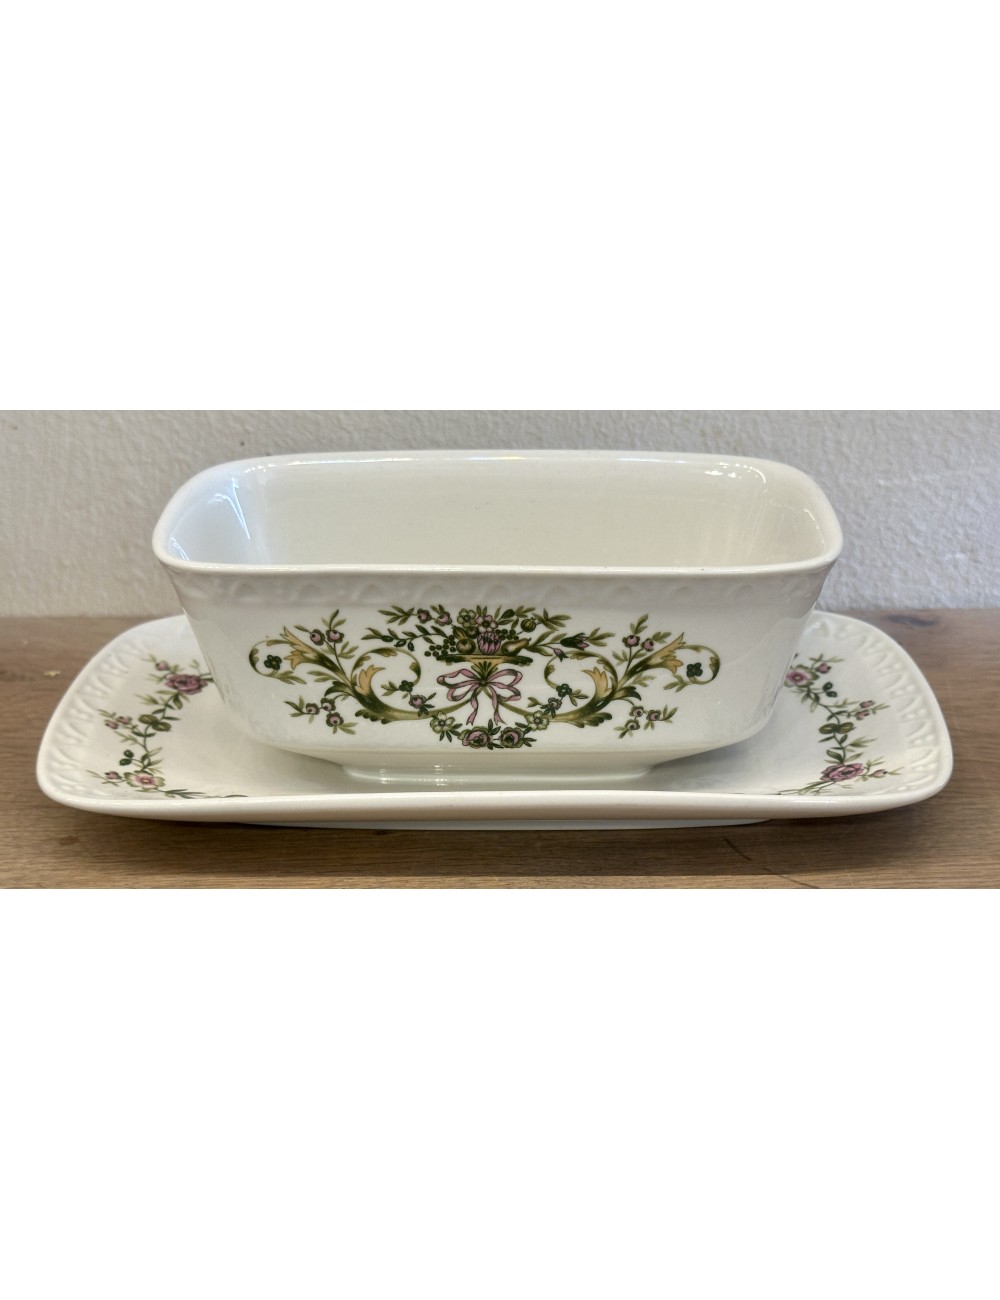 Gravy boat / Sauce bowl - Villeroy & Boch - décor TRIANON with green/pink decoration in refractory porcelain